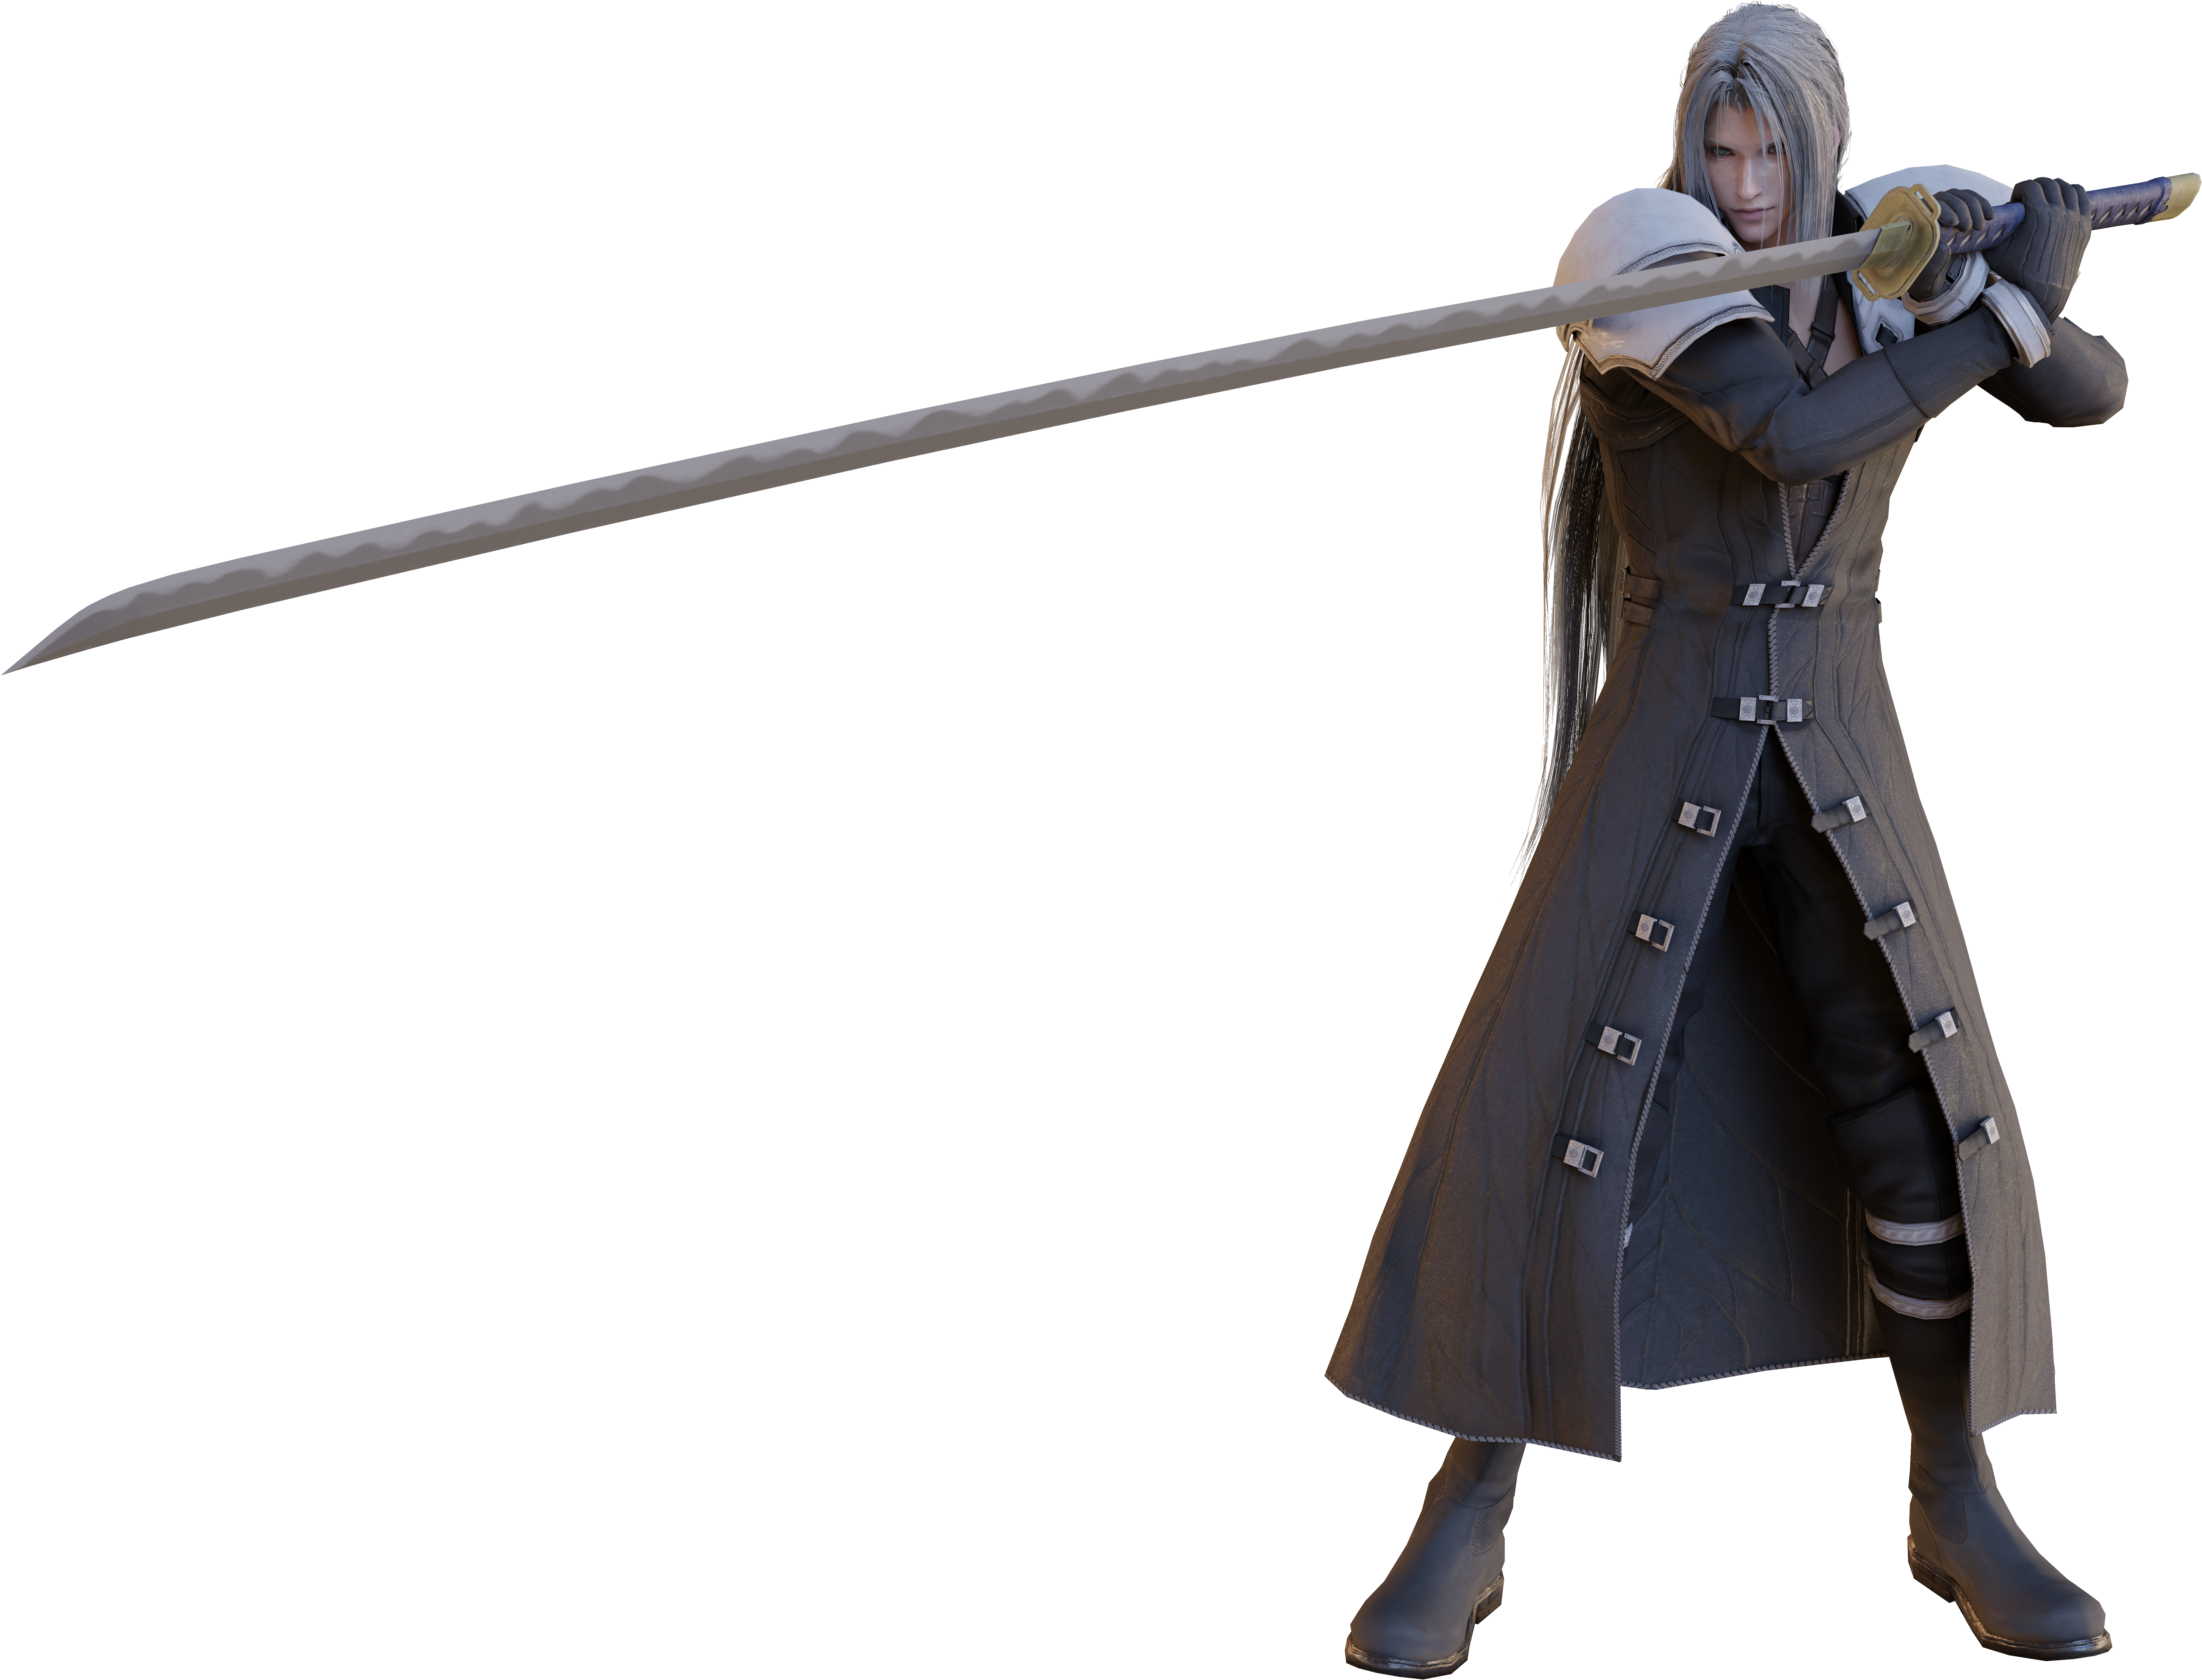 https://static.wikia.nocookie.net/finalfantasy/images/b/b1/Sephiroth_from_Crisis_Core_Reunion_boss_render.png/revision/latest?cb=20221221070644